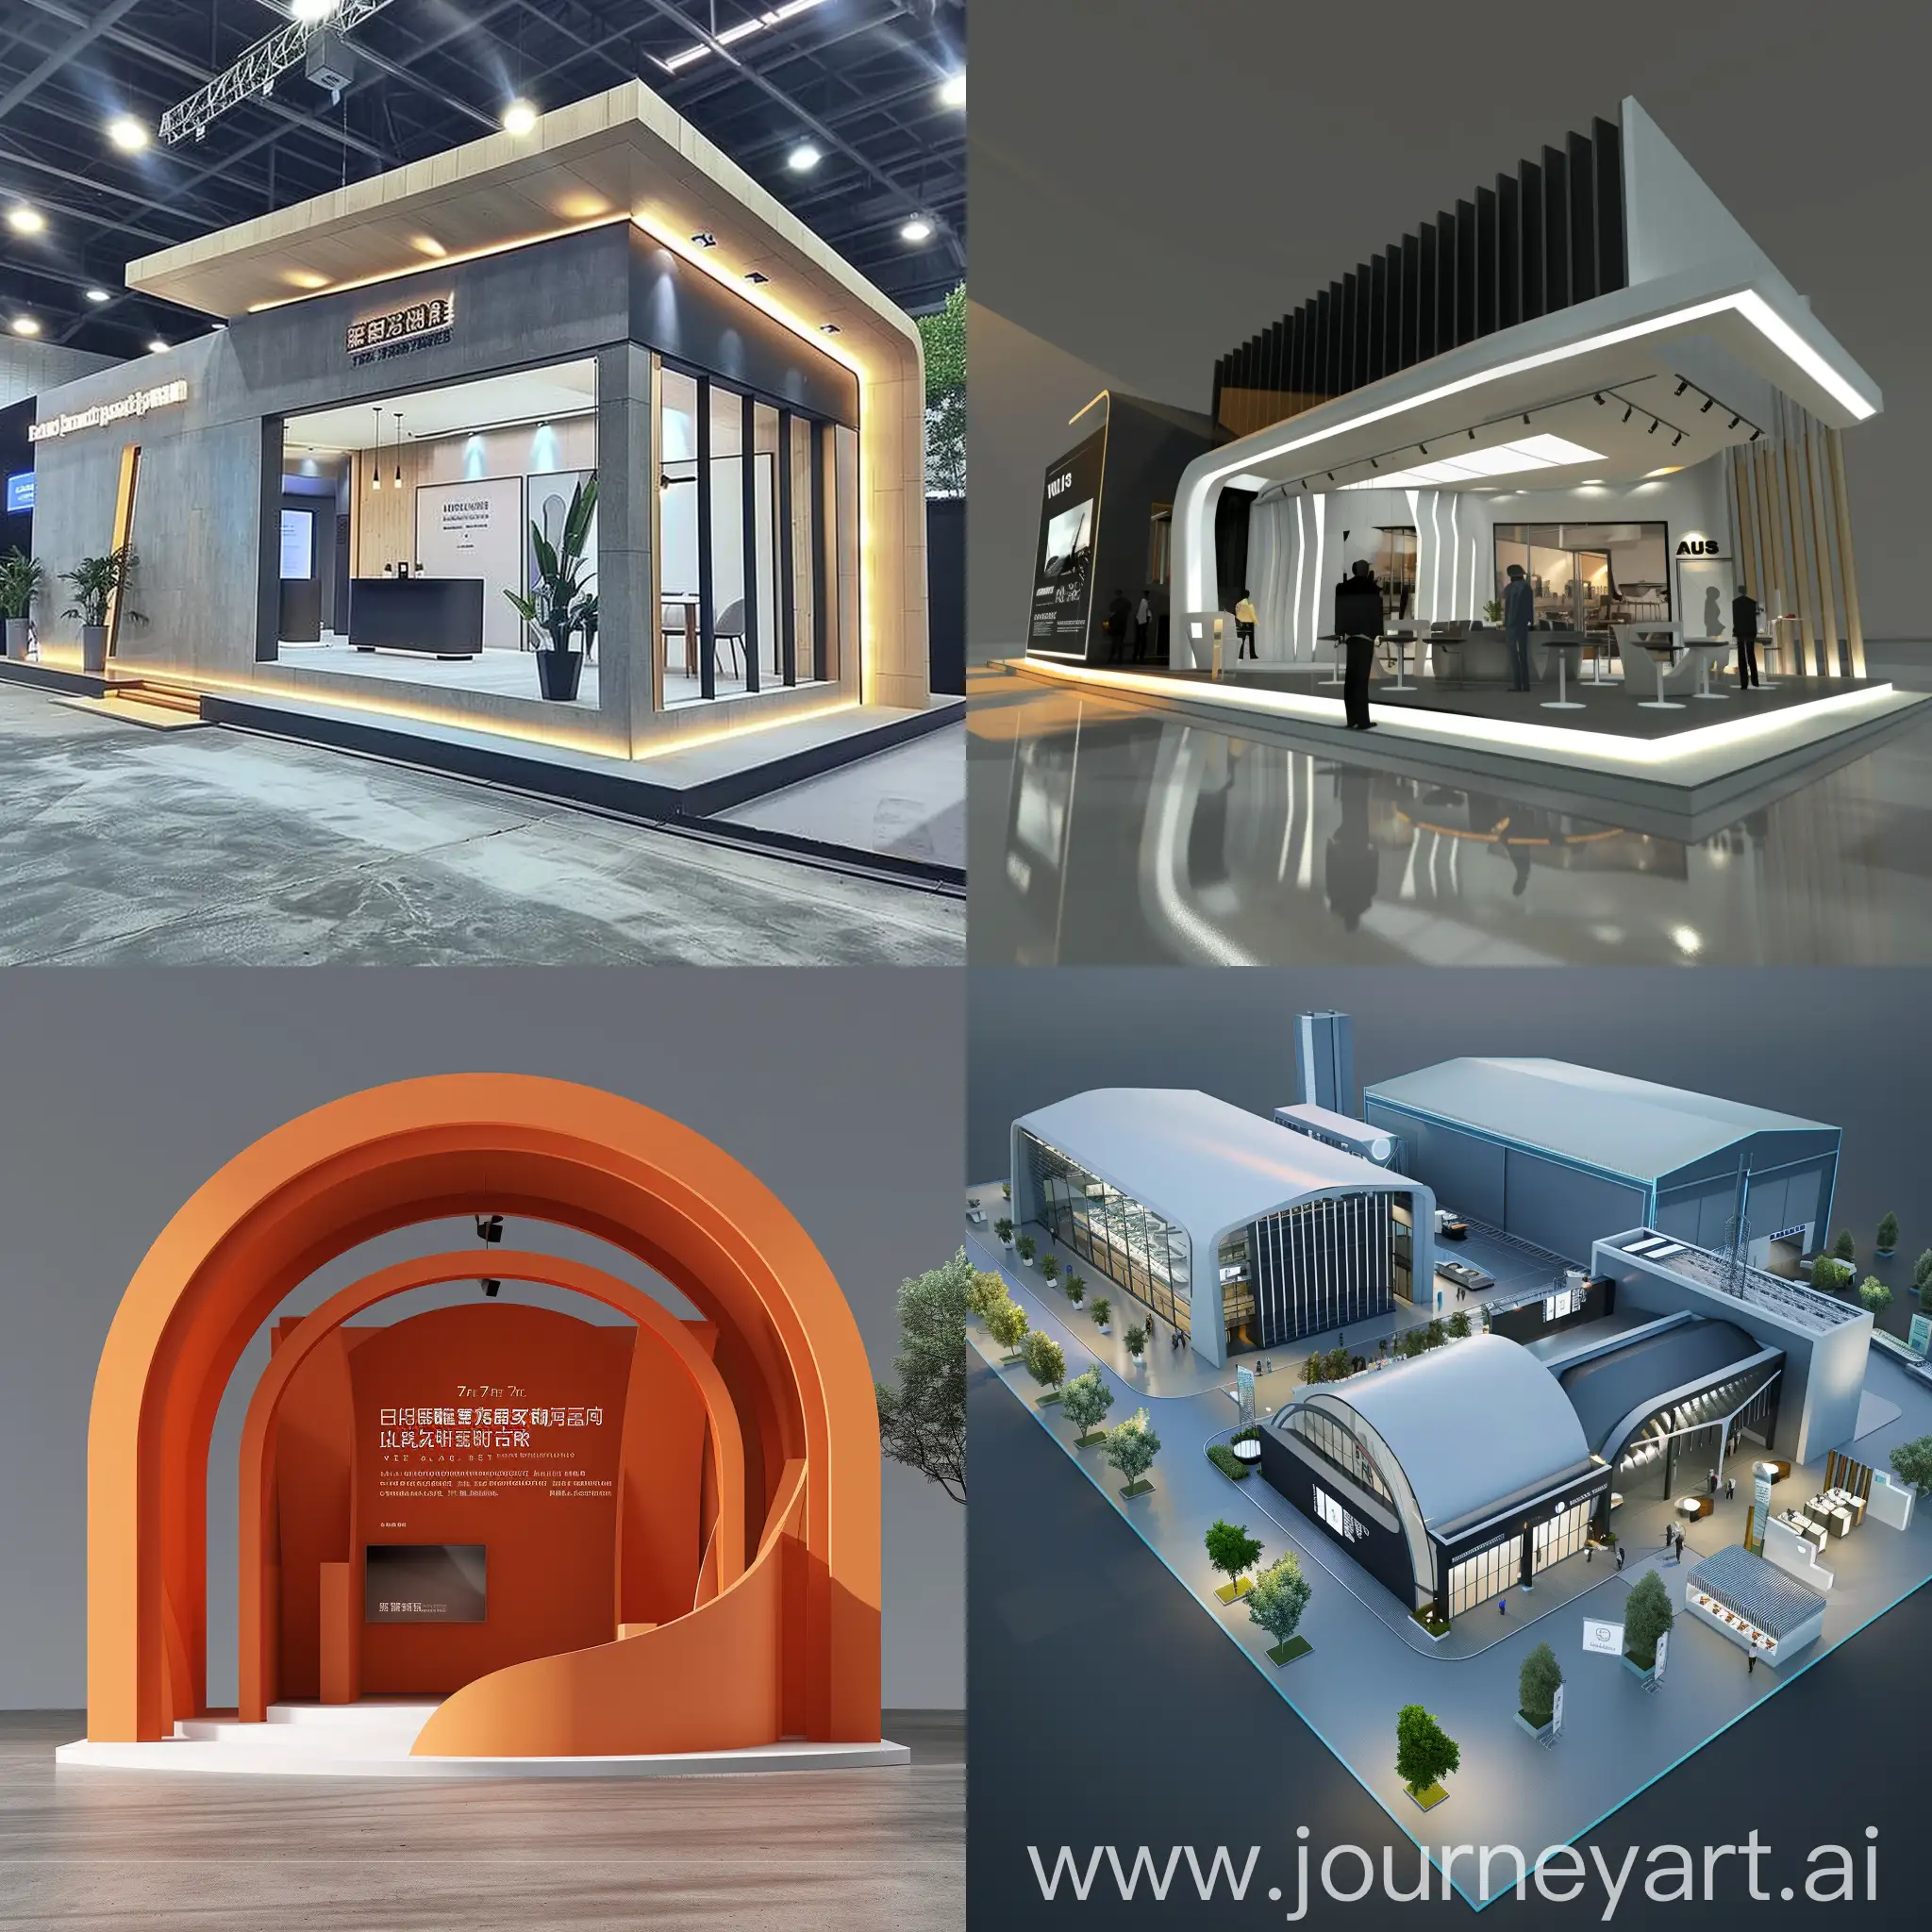 I need to create an image to be like invitation to put it in our website and company linked in Page, i need to invite the customers to visit us in our us in the following event: The 7th International Exhibition For Construction 